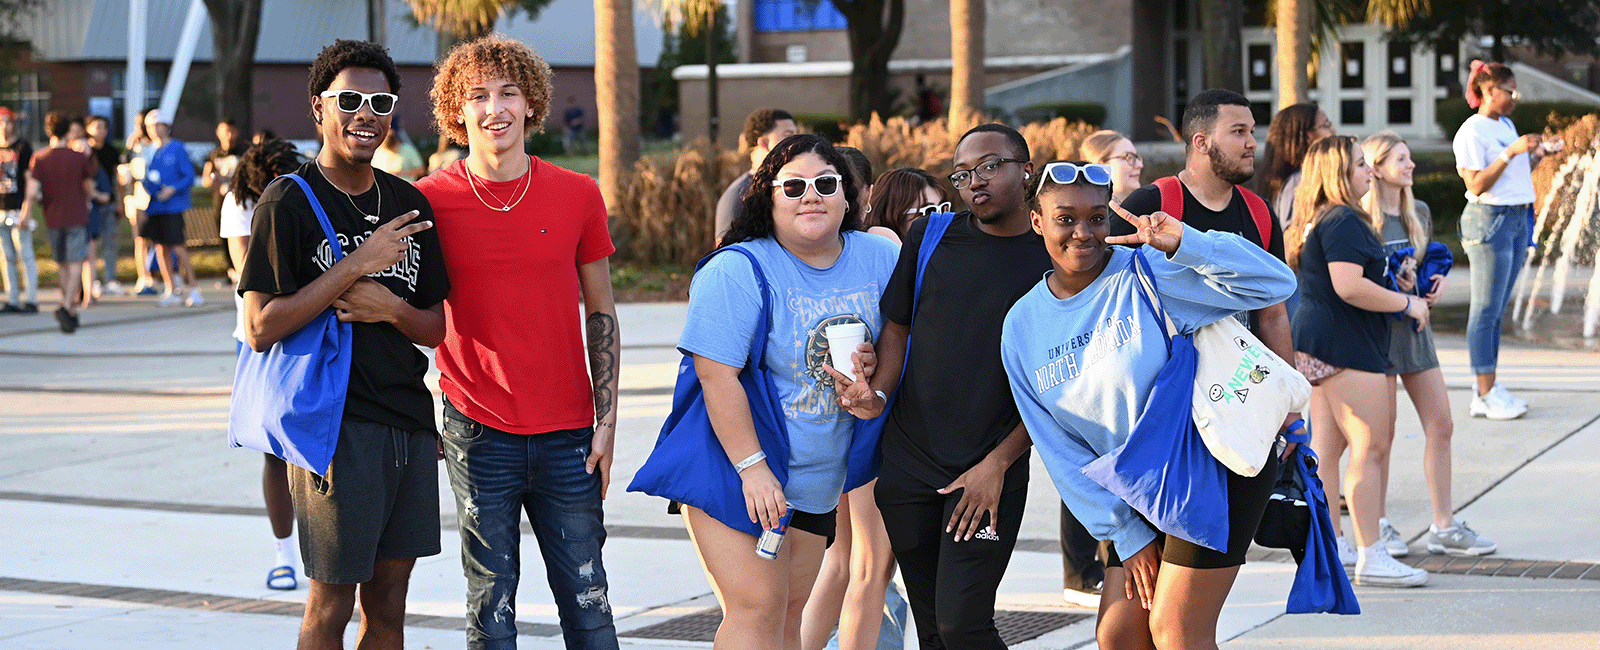 students smiling and posing on UNF campus